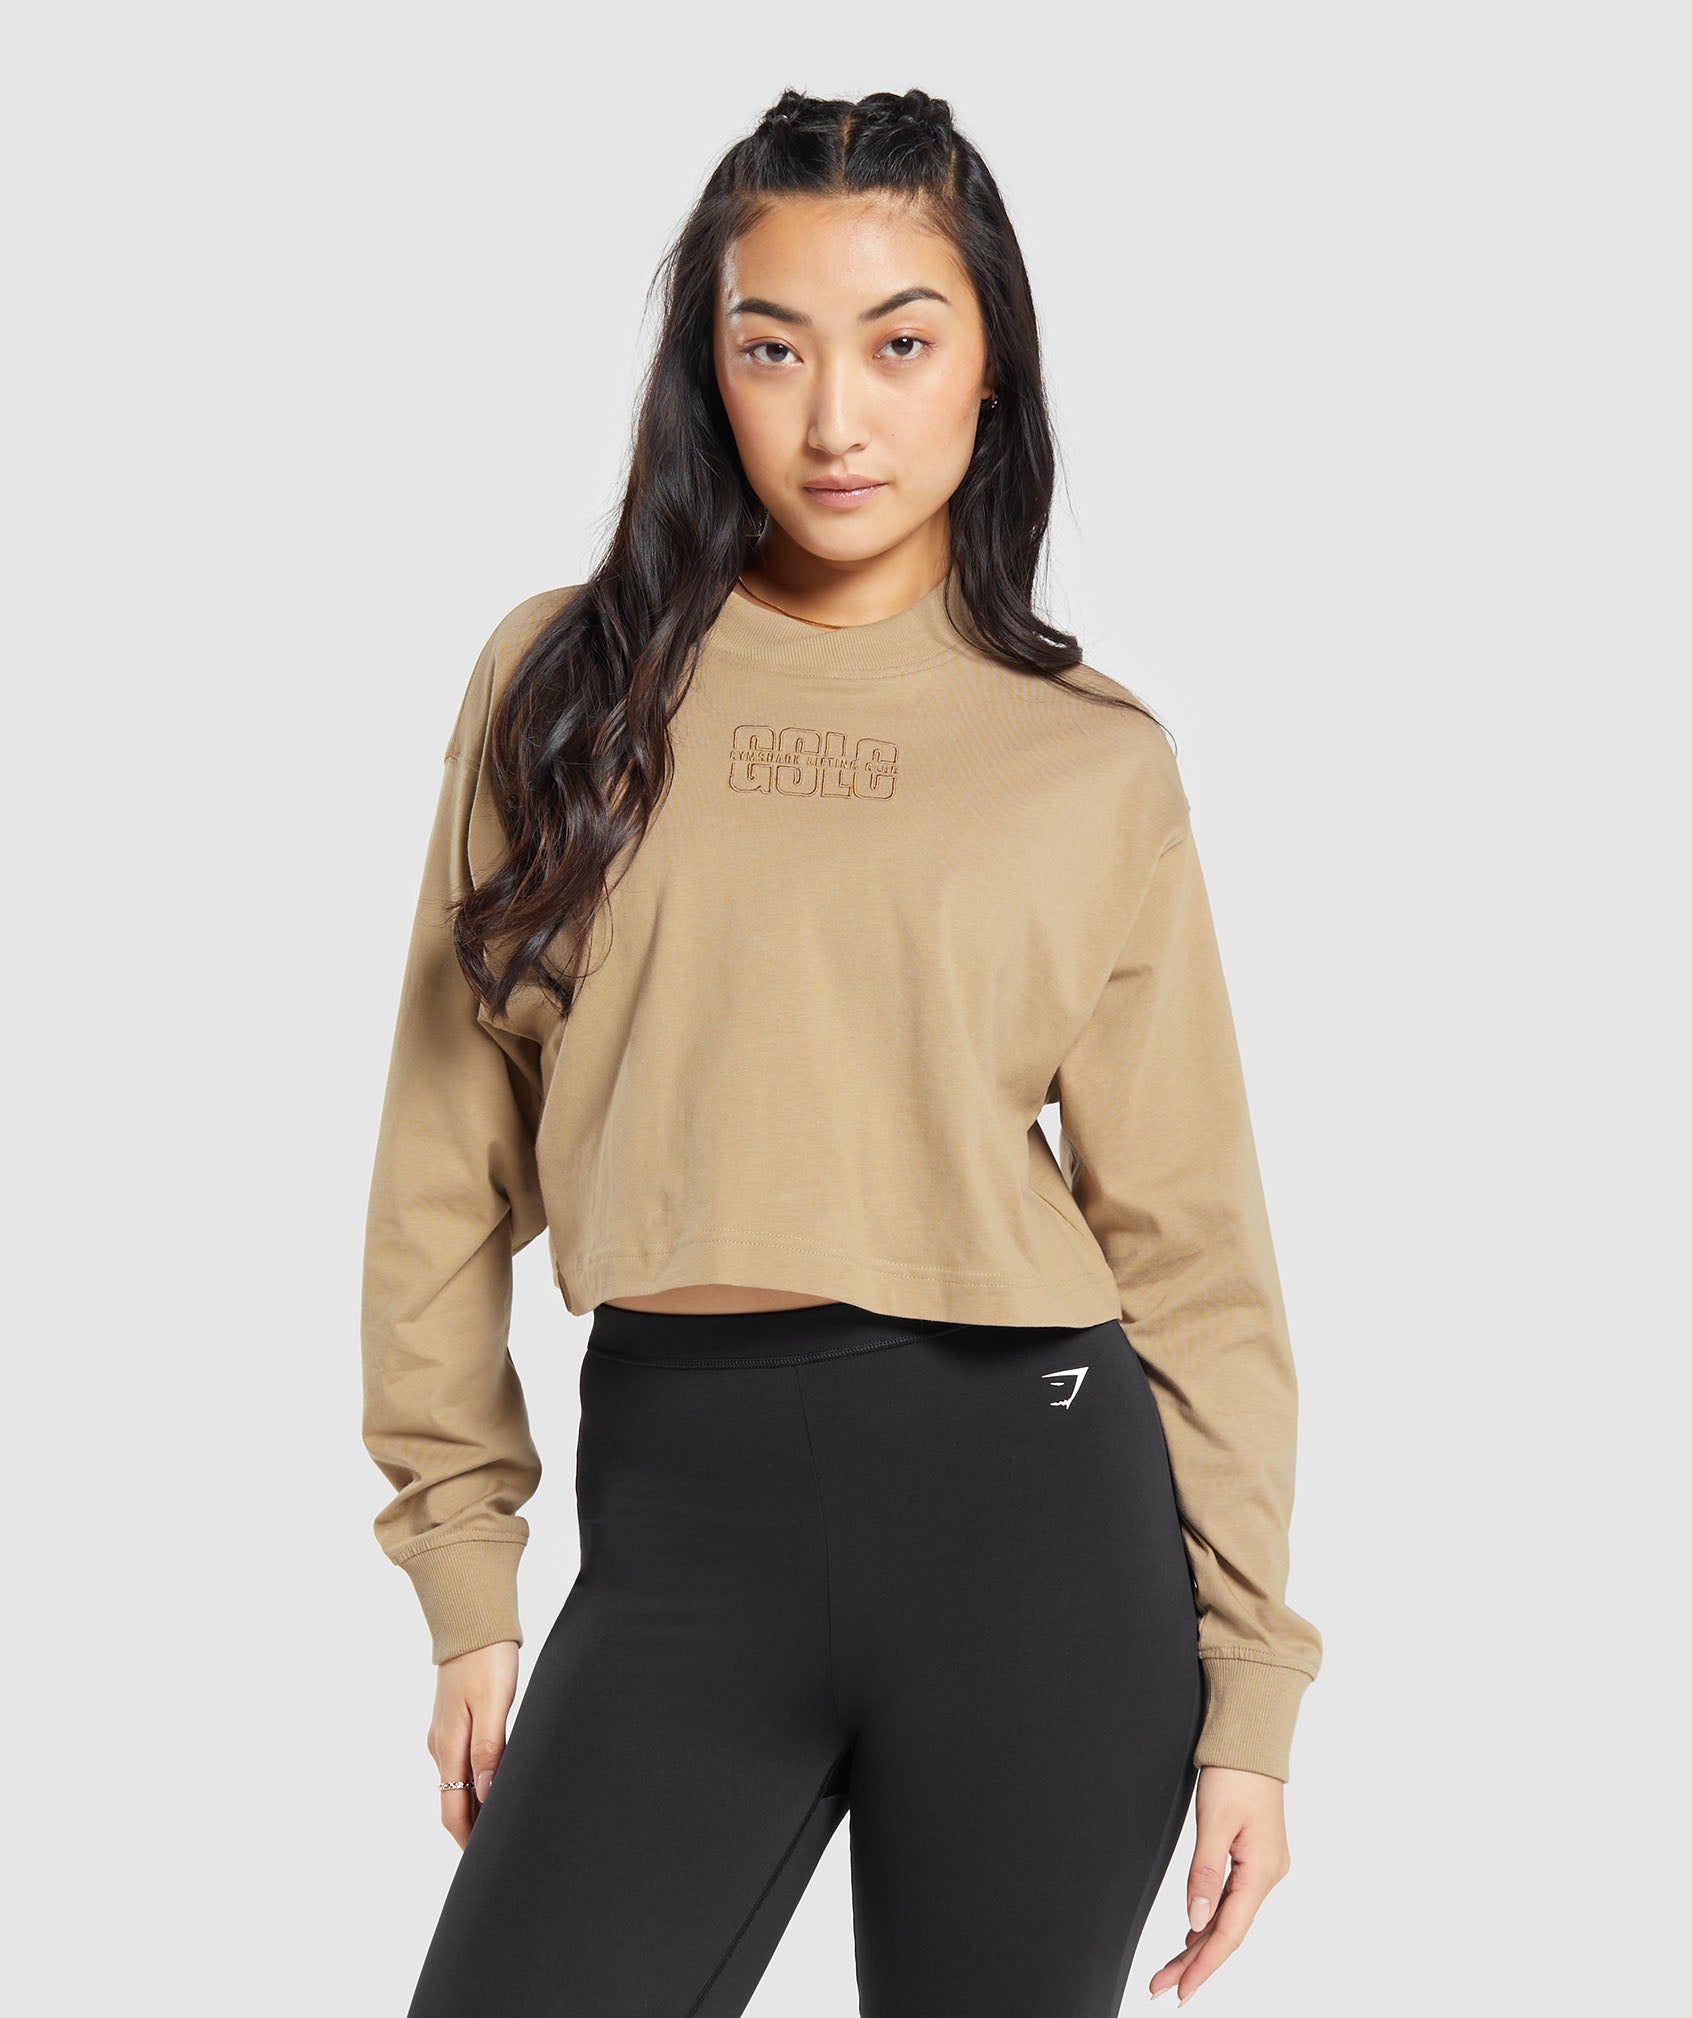 Outline Graphic Oversized Long Sleeve Top in Deep Fawn Brown - view 1